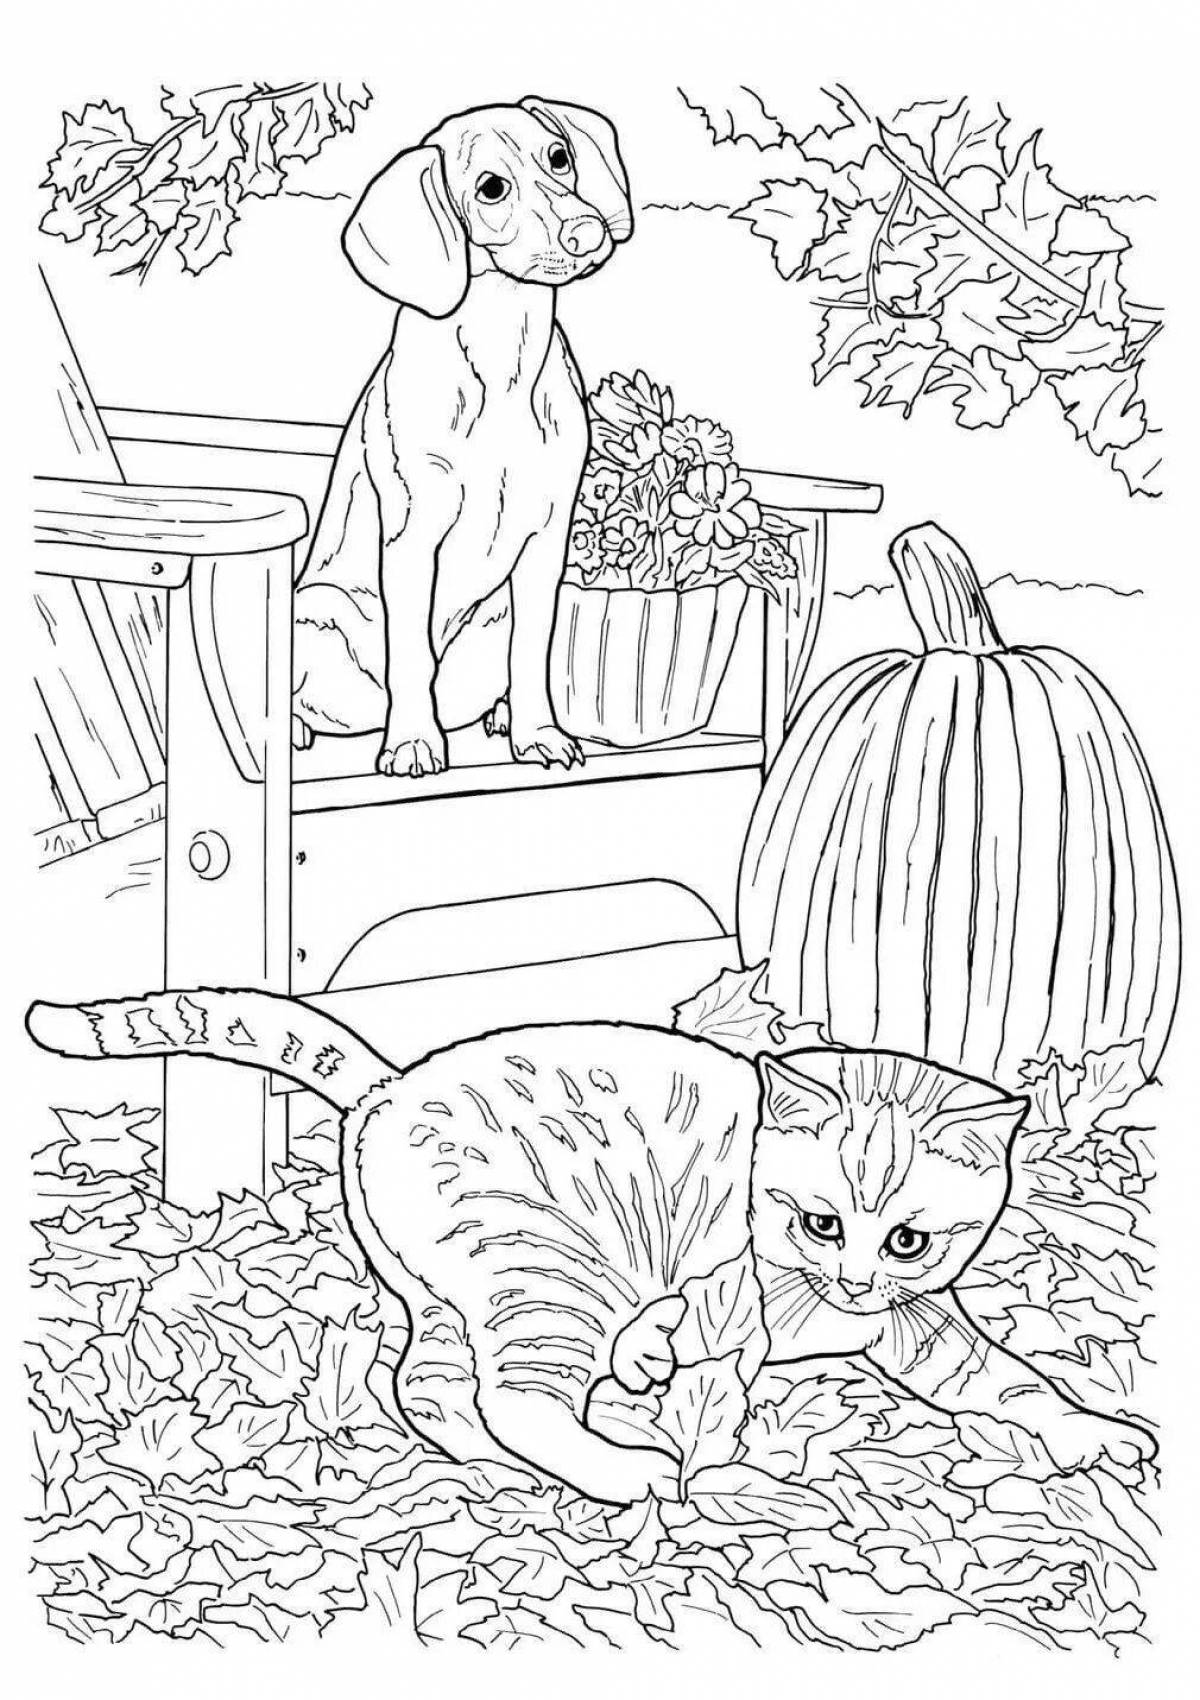 Joyful coloring for girls, cats and dogs